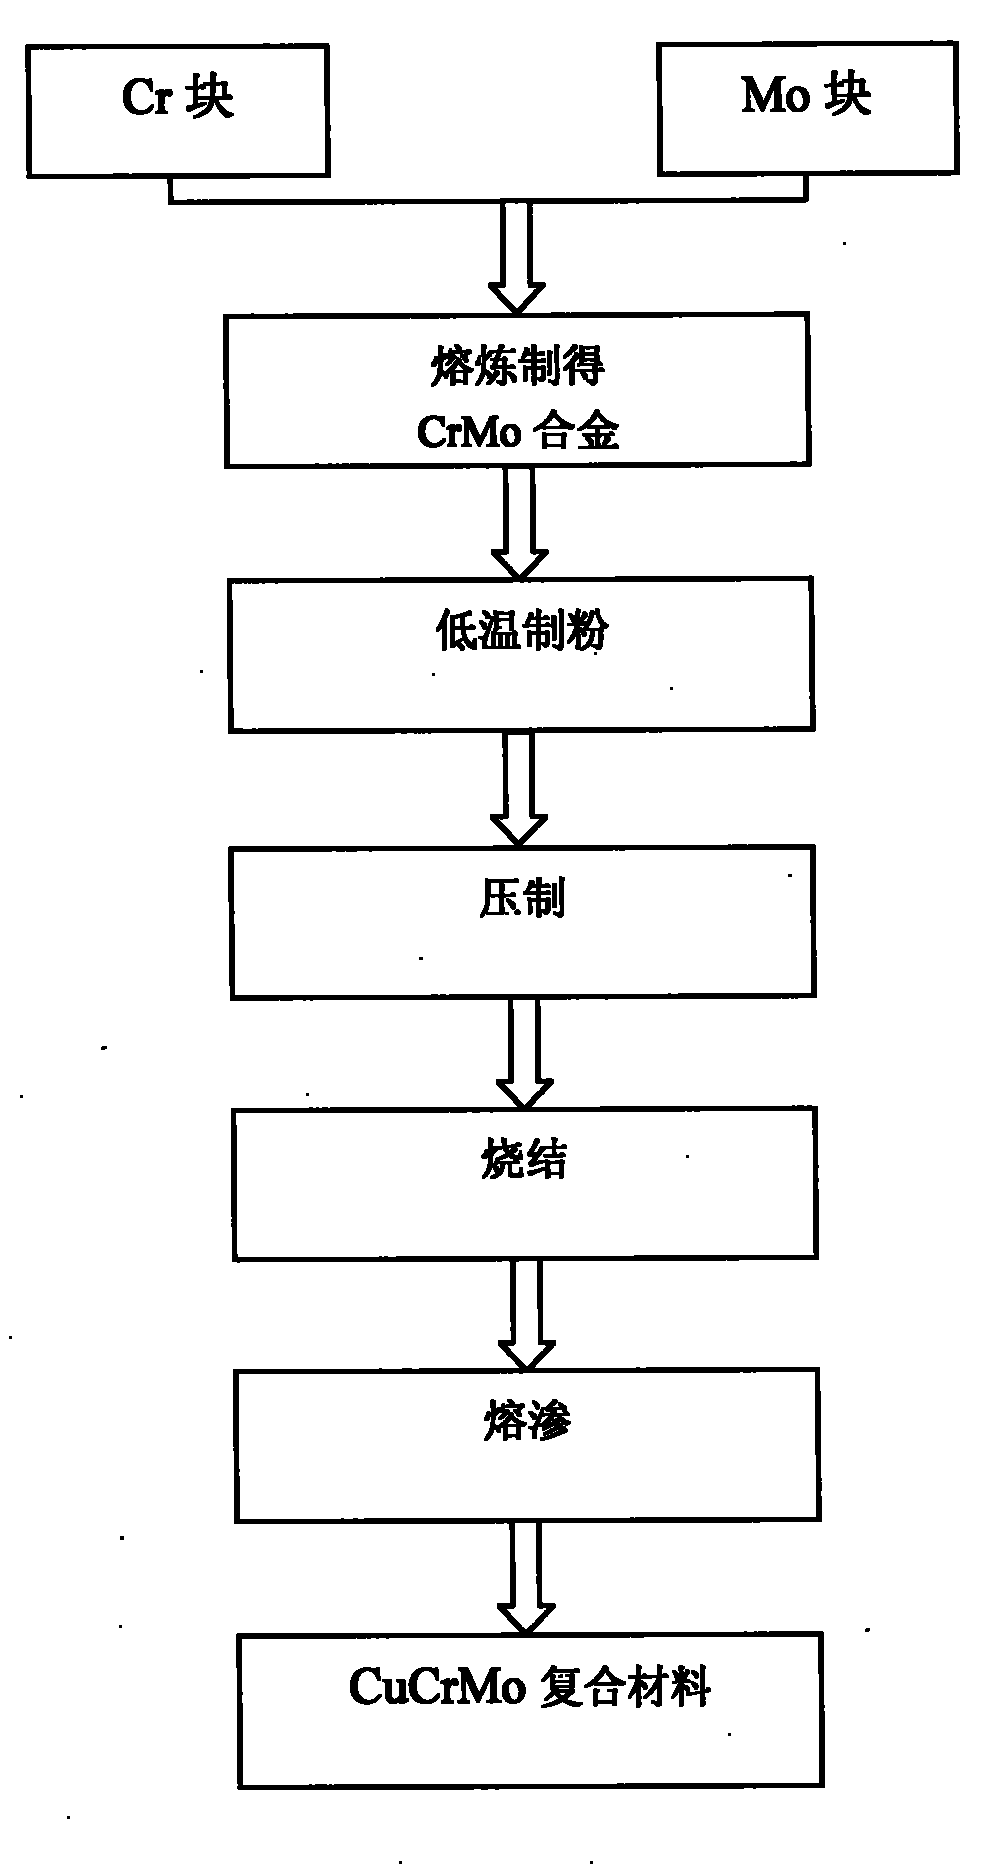 Method for preparing CuCrMo contact material by adopting CrMo alloy powder